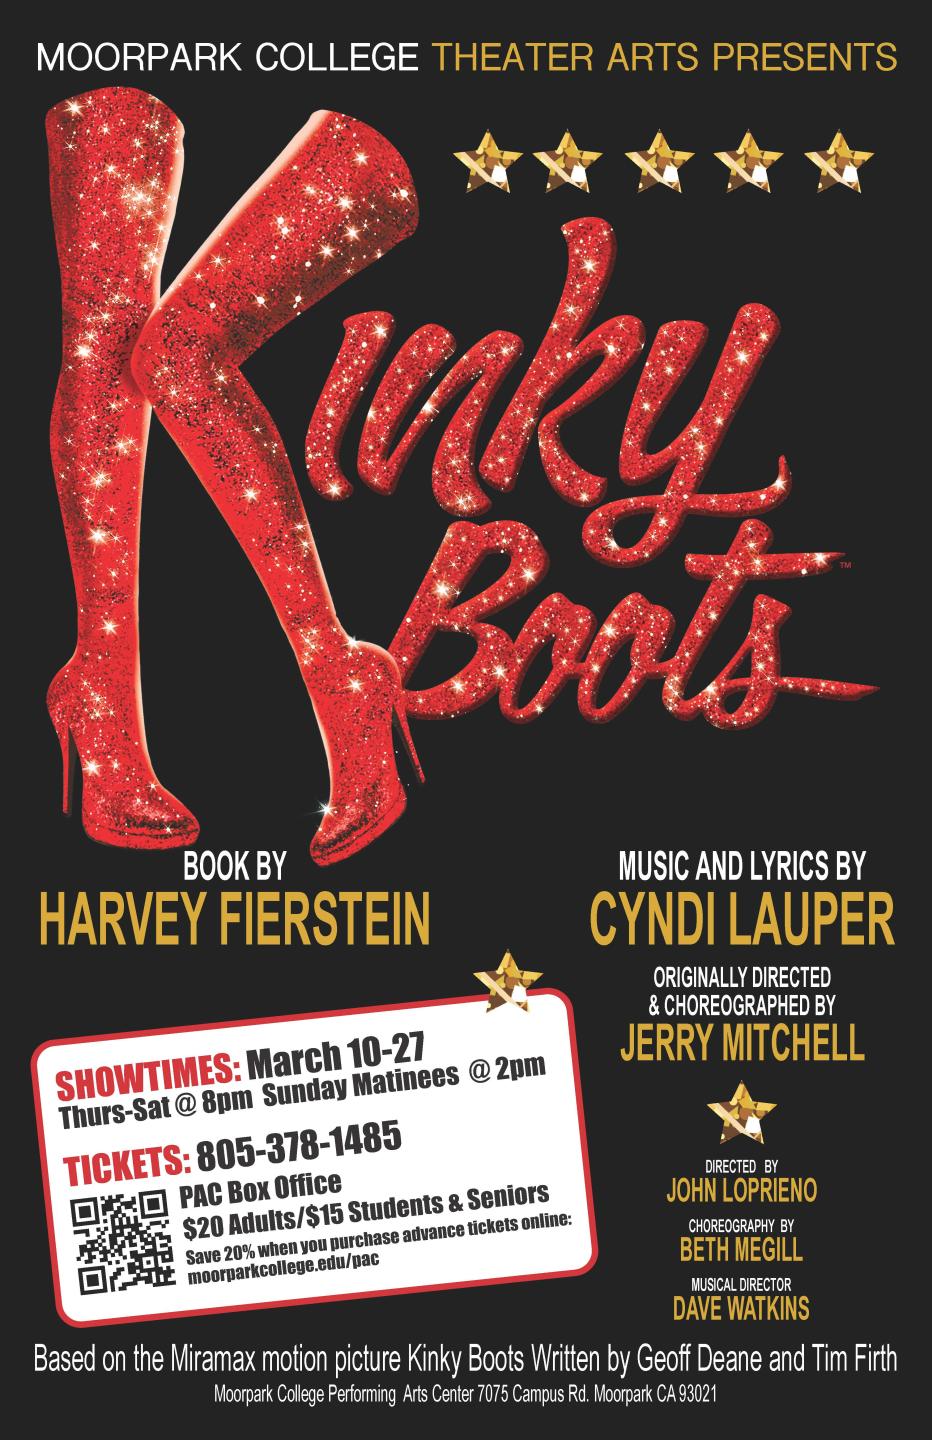 Must See Musical - KINKY BOOTS at Moorpark College March 10th through March 27th